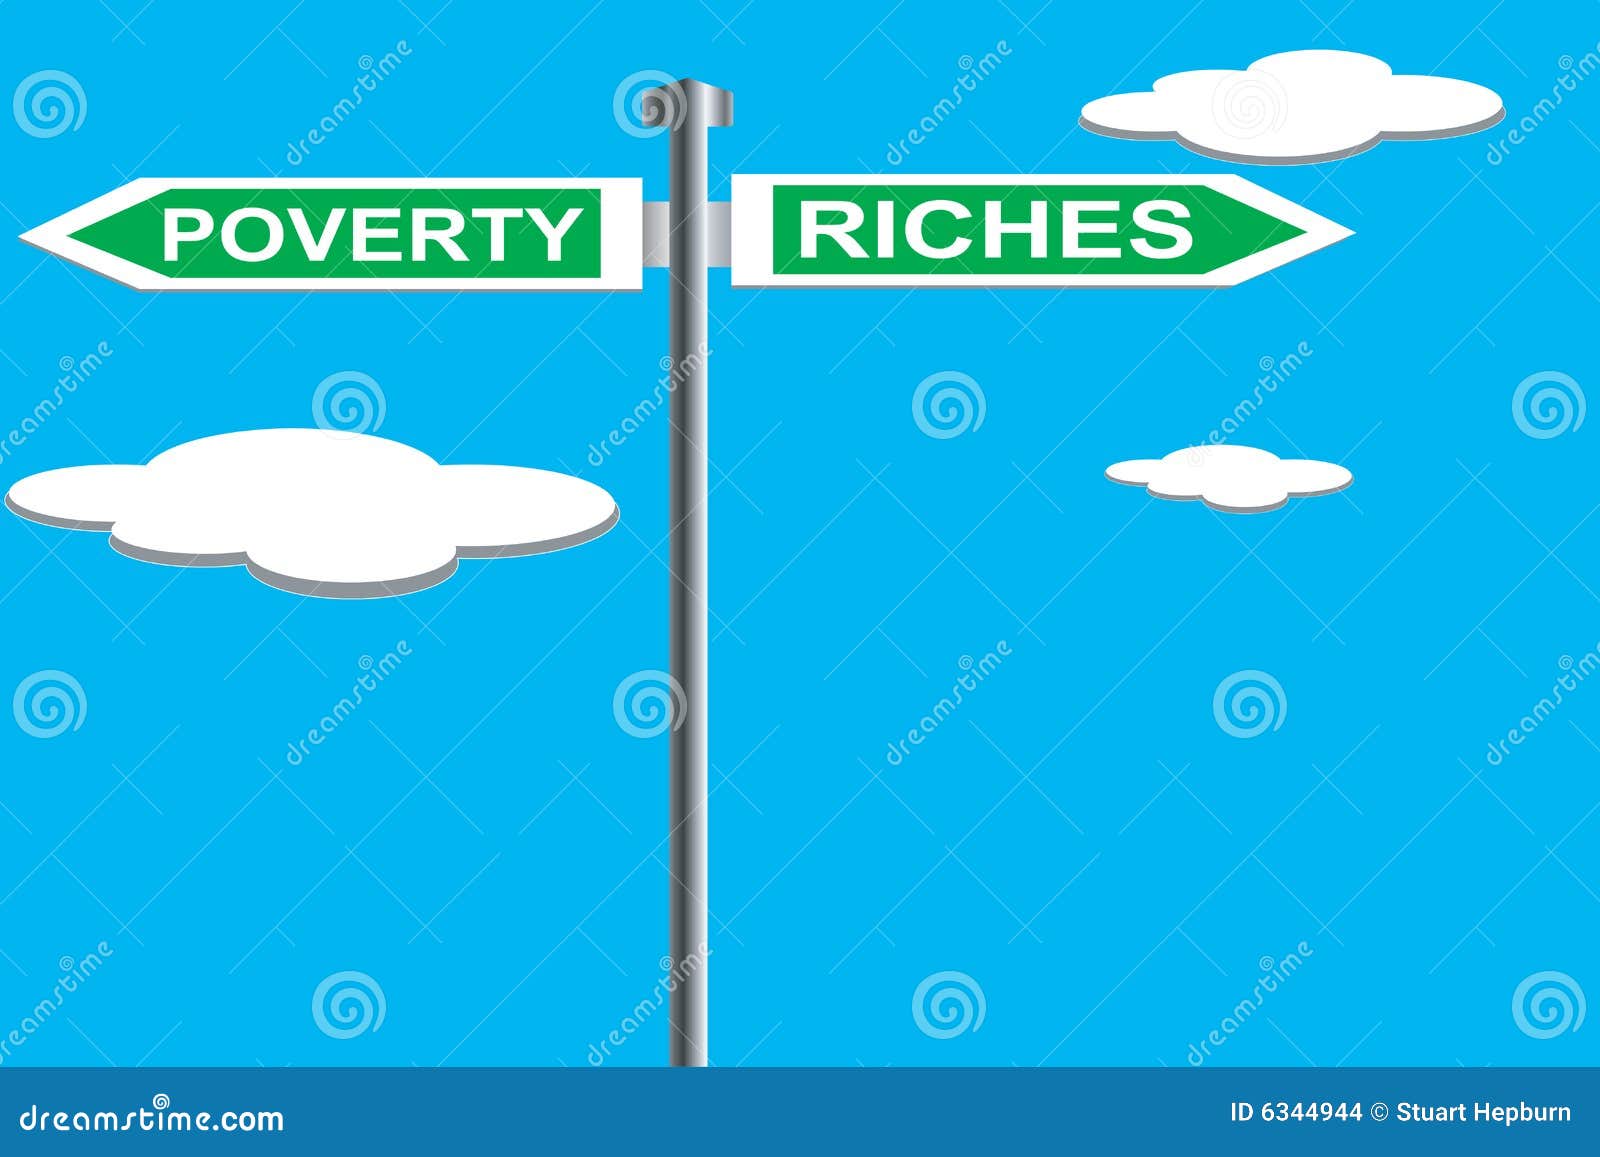 riches and poverty